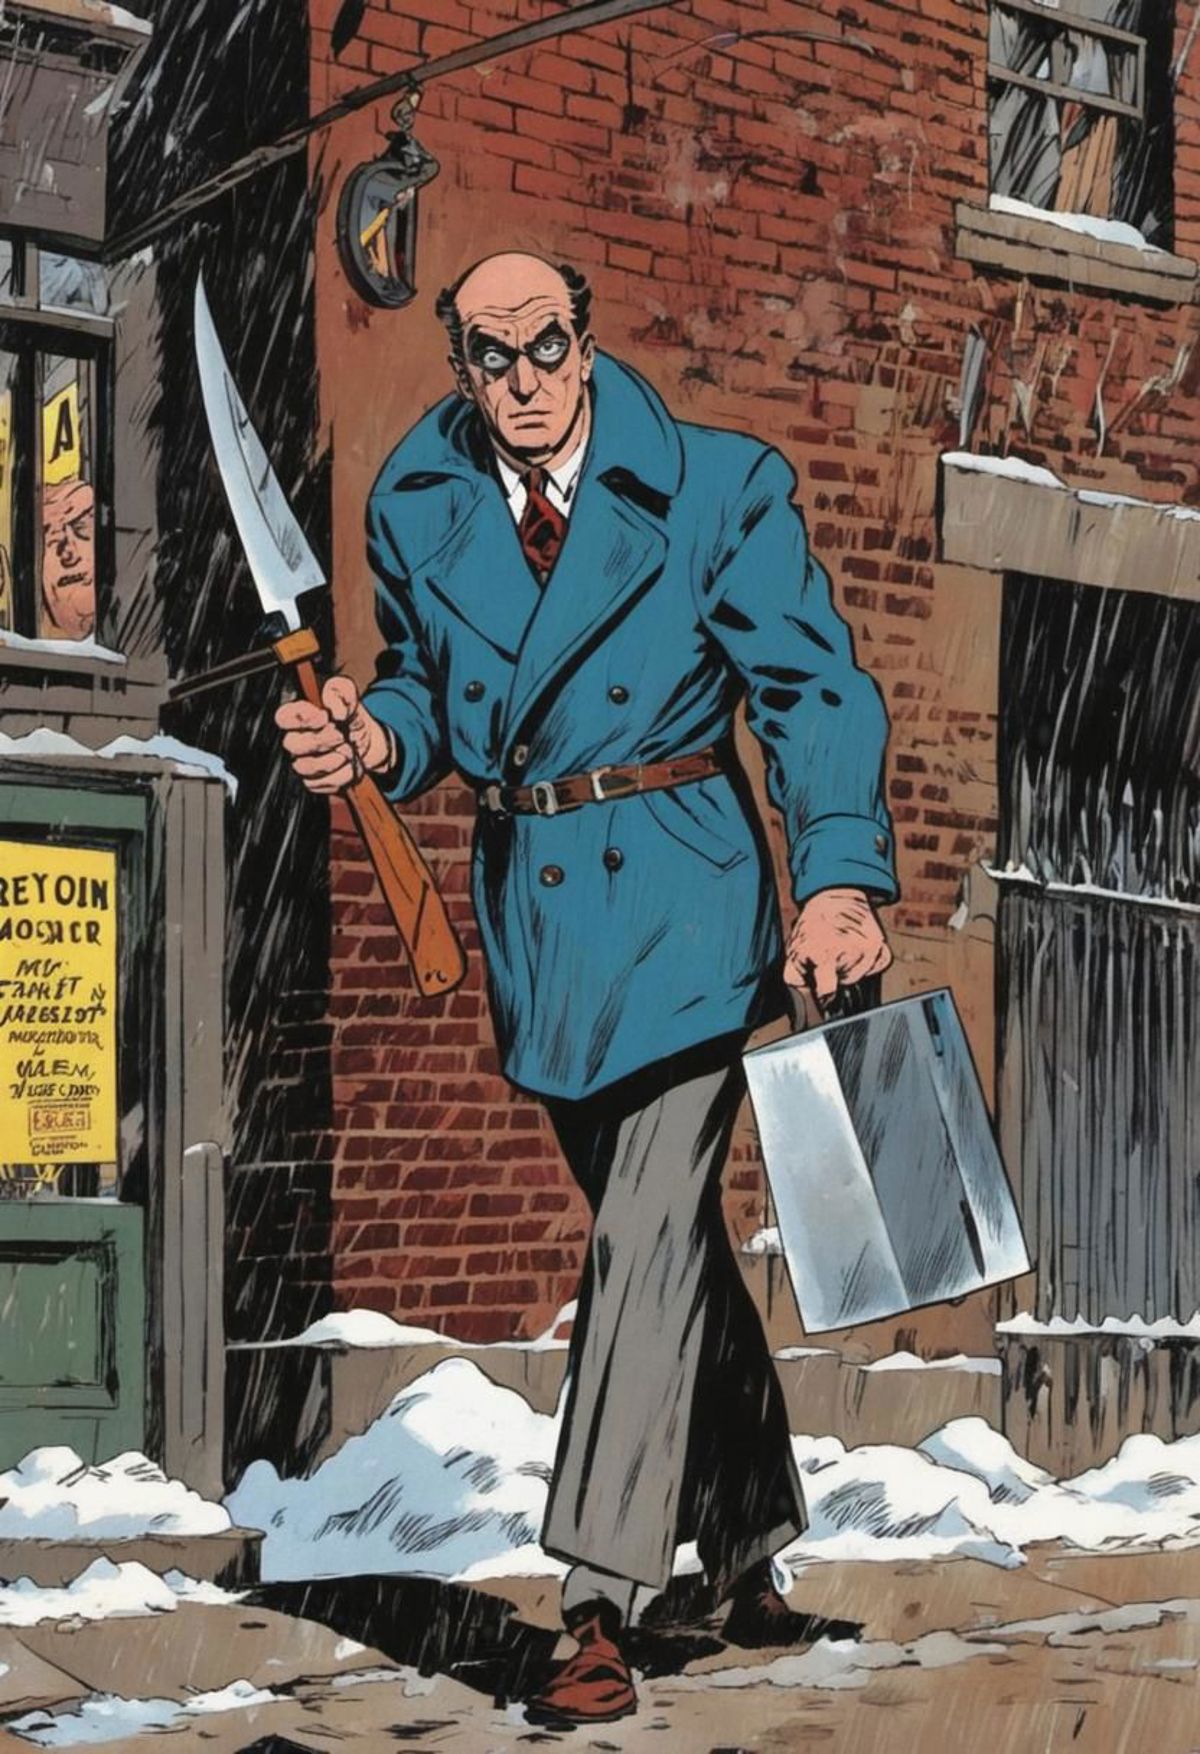 Will Eisner Style image by beg0n